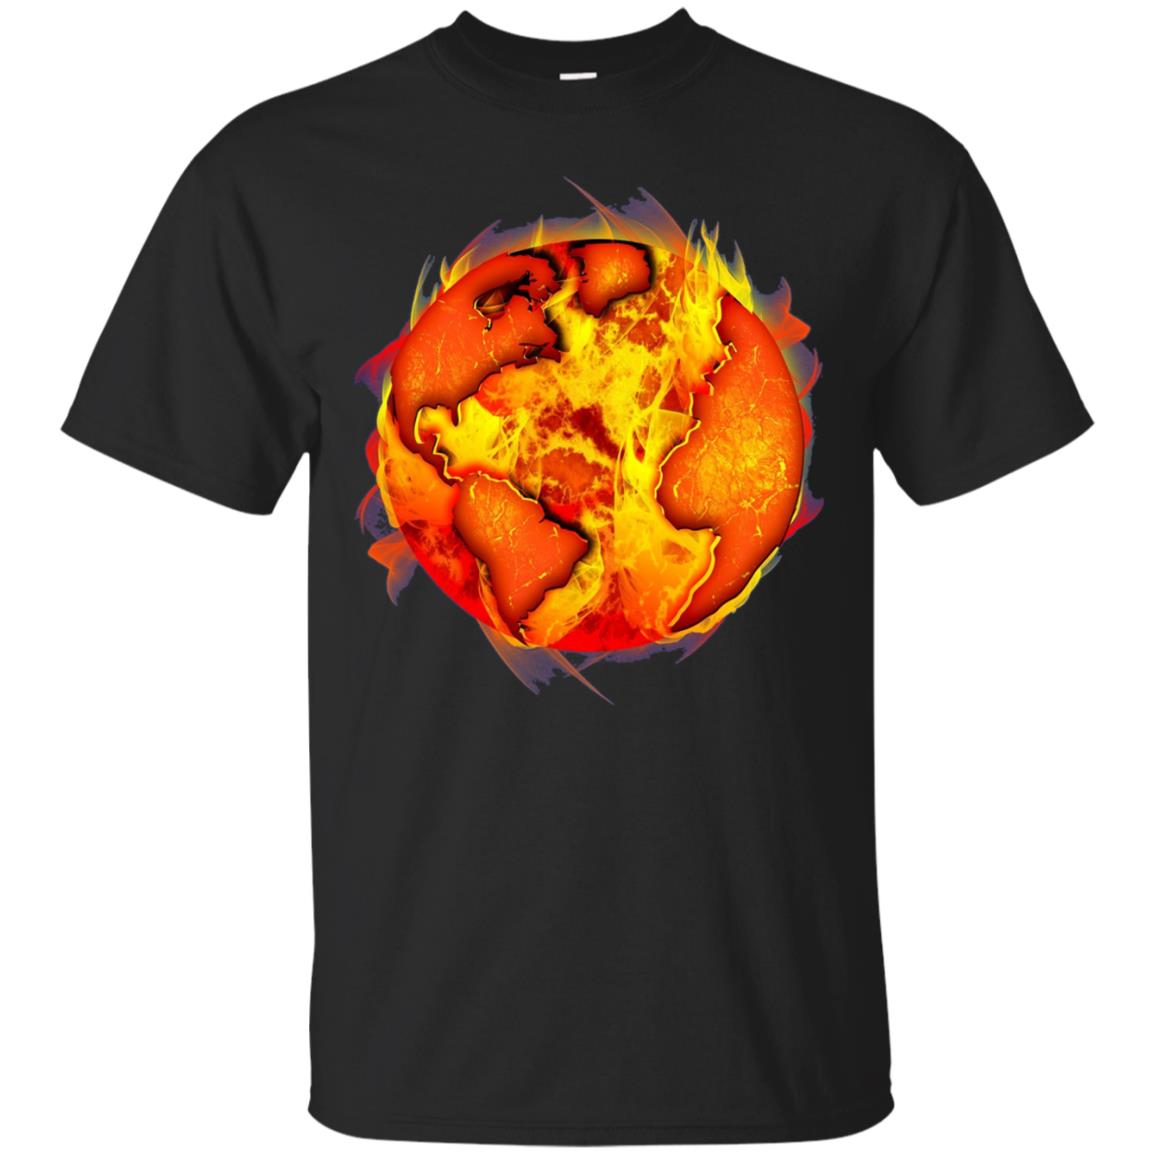 Hot Planet Earth Climate Change Warming Gift T-shirt